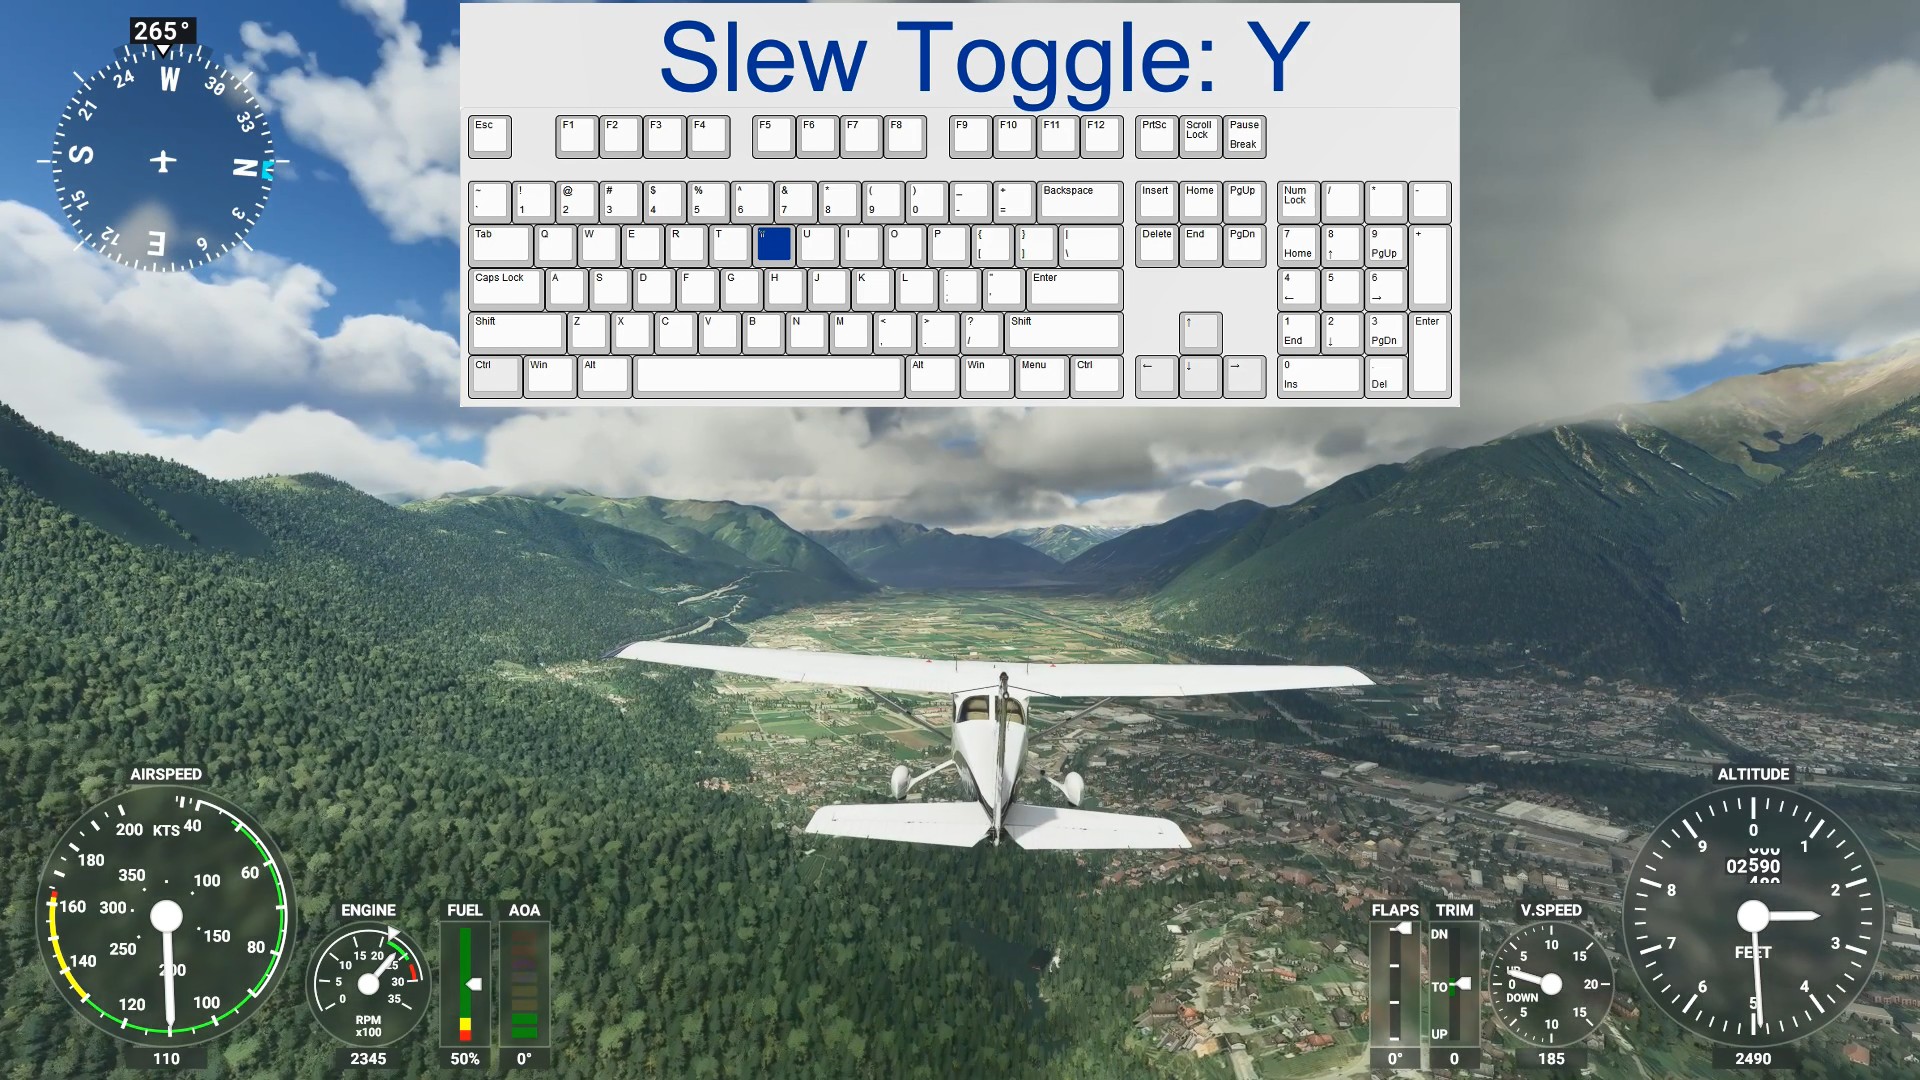 If you wonder how to navigate the Microsoft Flight Simulator with